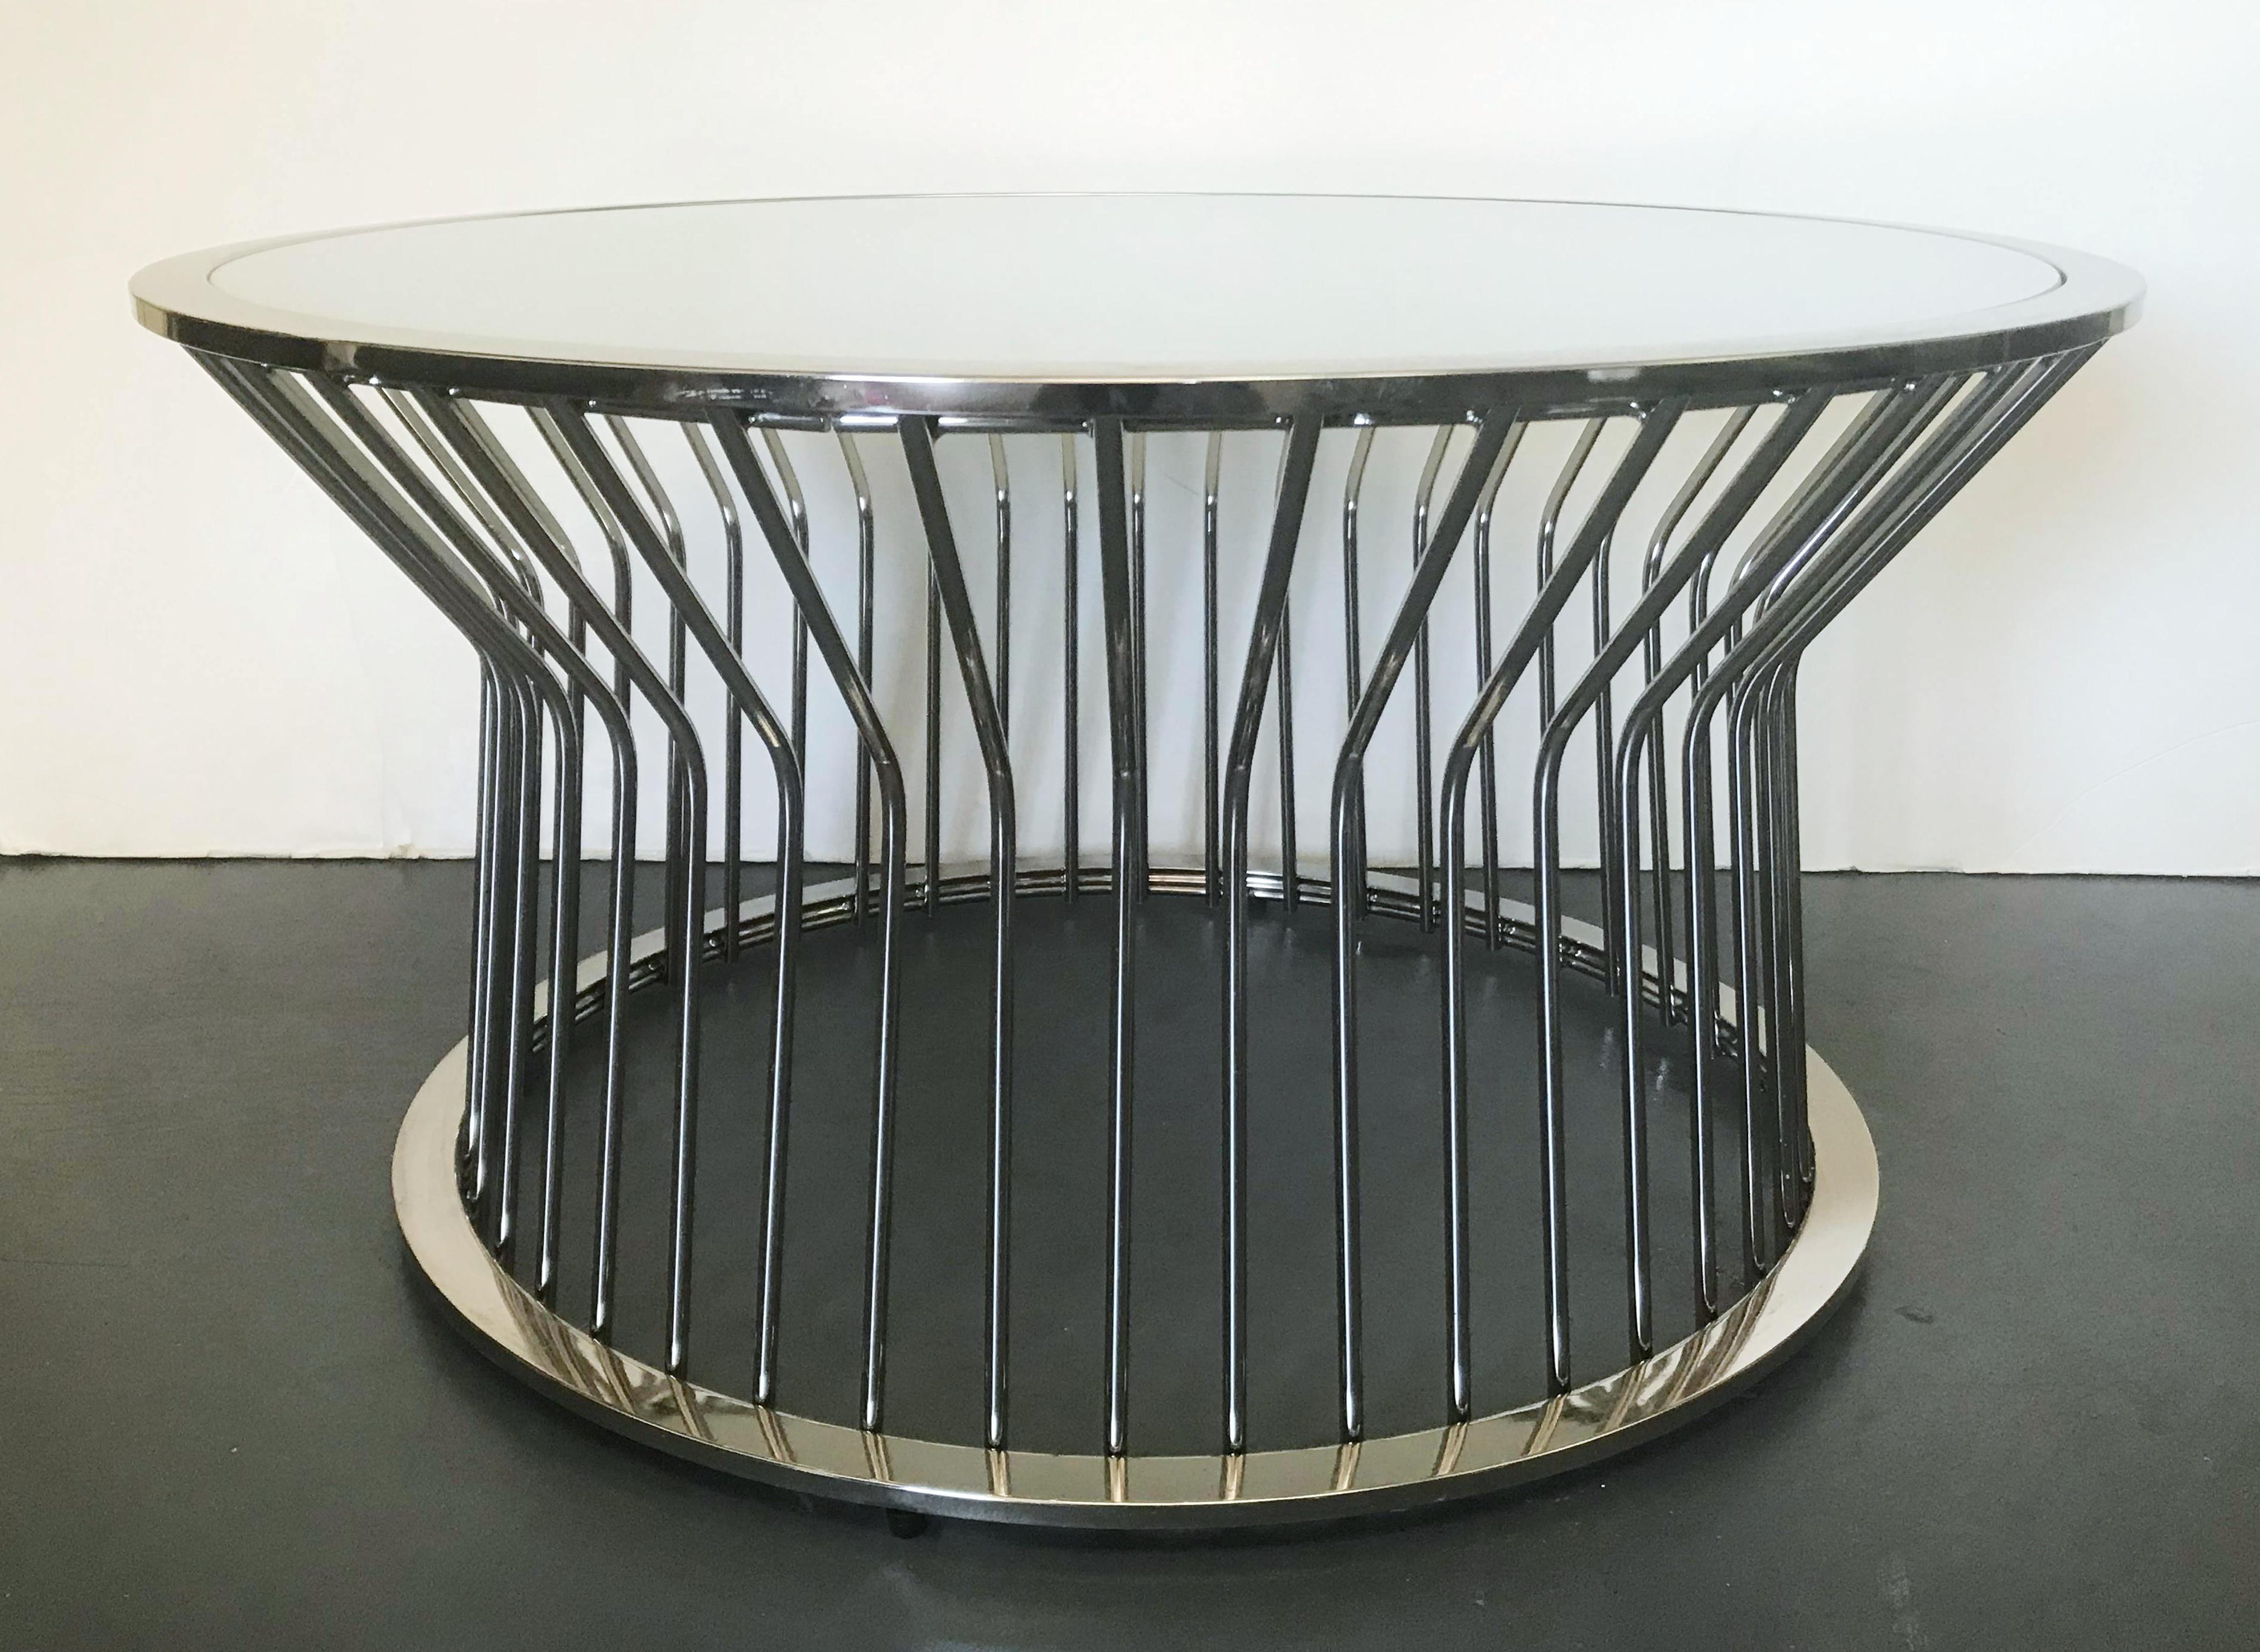 Vintage round coffee or cocktail table with chrome base and frosted glass top / Made in the USA, circa 1970s
Measures: Diameter 35 inches, height 18 inches
1 available in stock in Palm Springs ON FINAL CLEARANCE SALE for $1,125 !!
Order Reference #: